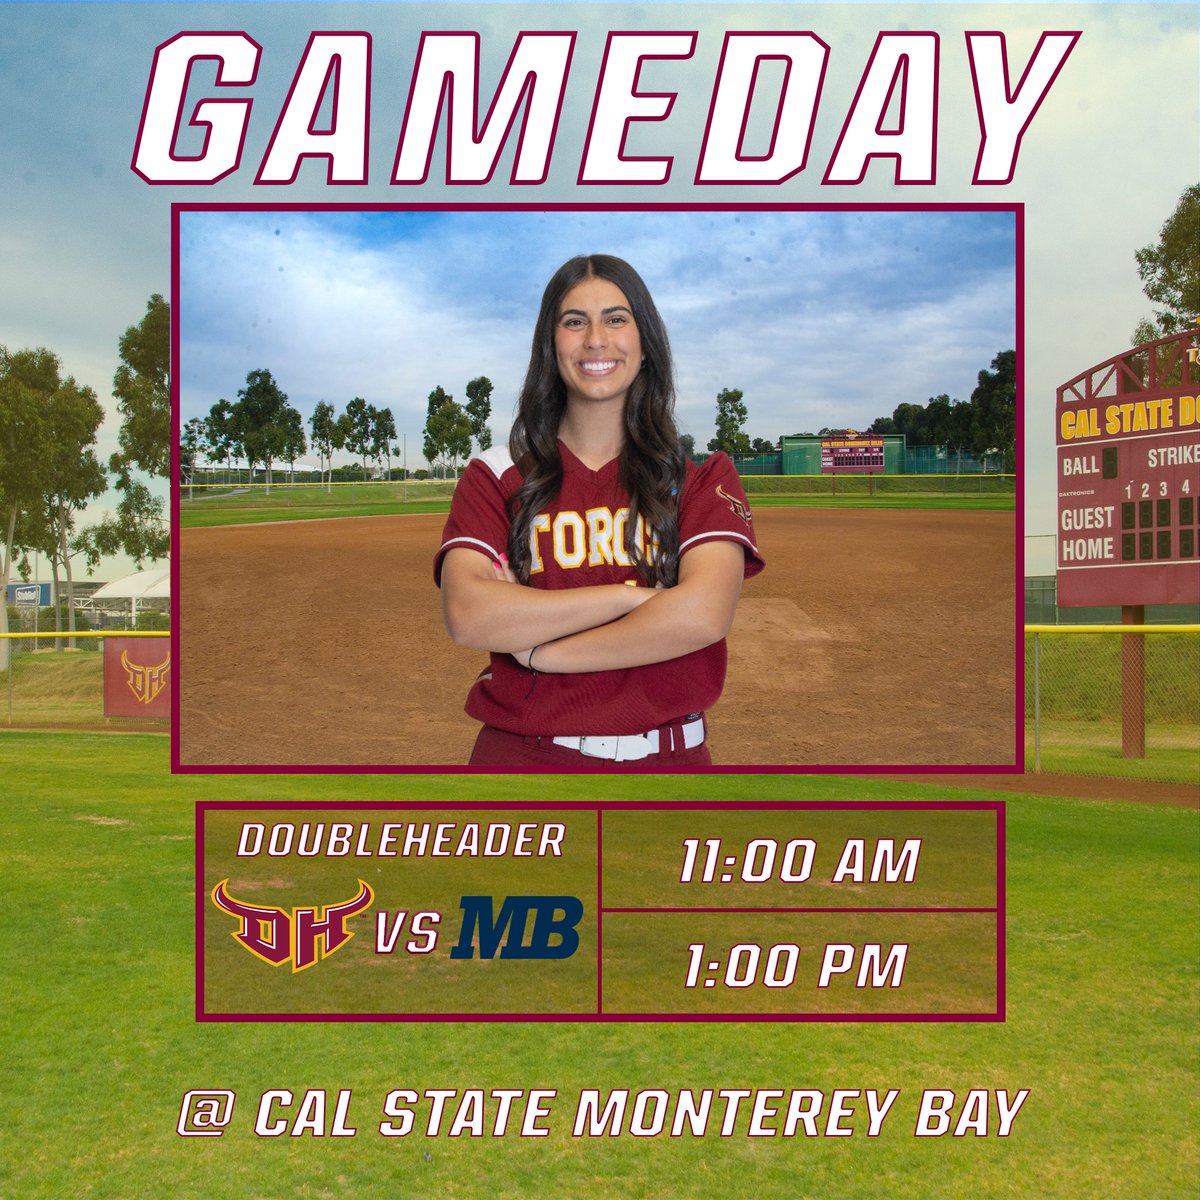 Gameday! @CSUDHsoftball concludes their series against Cal State Monterey Bay in a doubleheader today. ⏰: 11 am & 1 pm 📍: Seaside, CA 📺: ccaanetwork.com 📊: bit.ly/3UvY8Bs